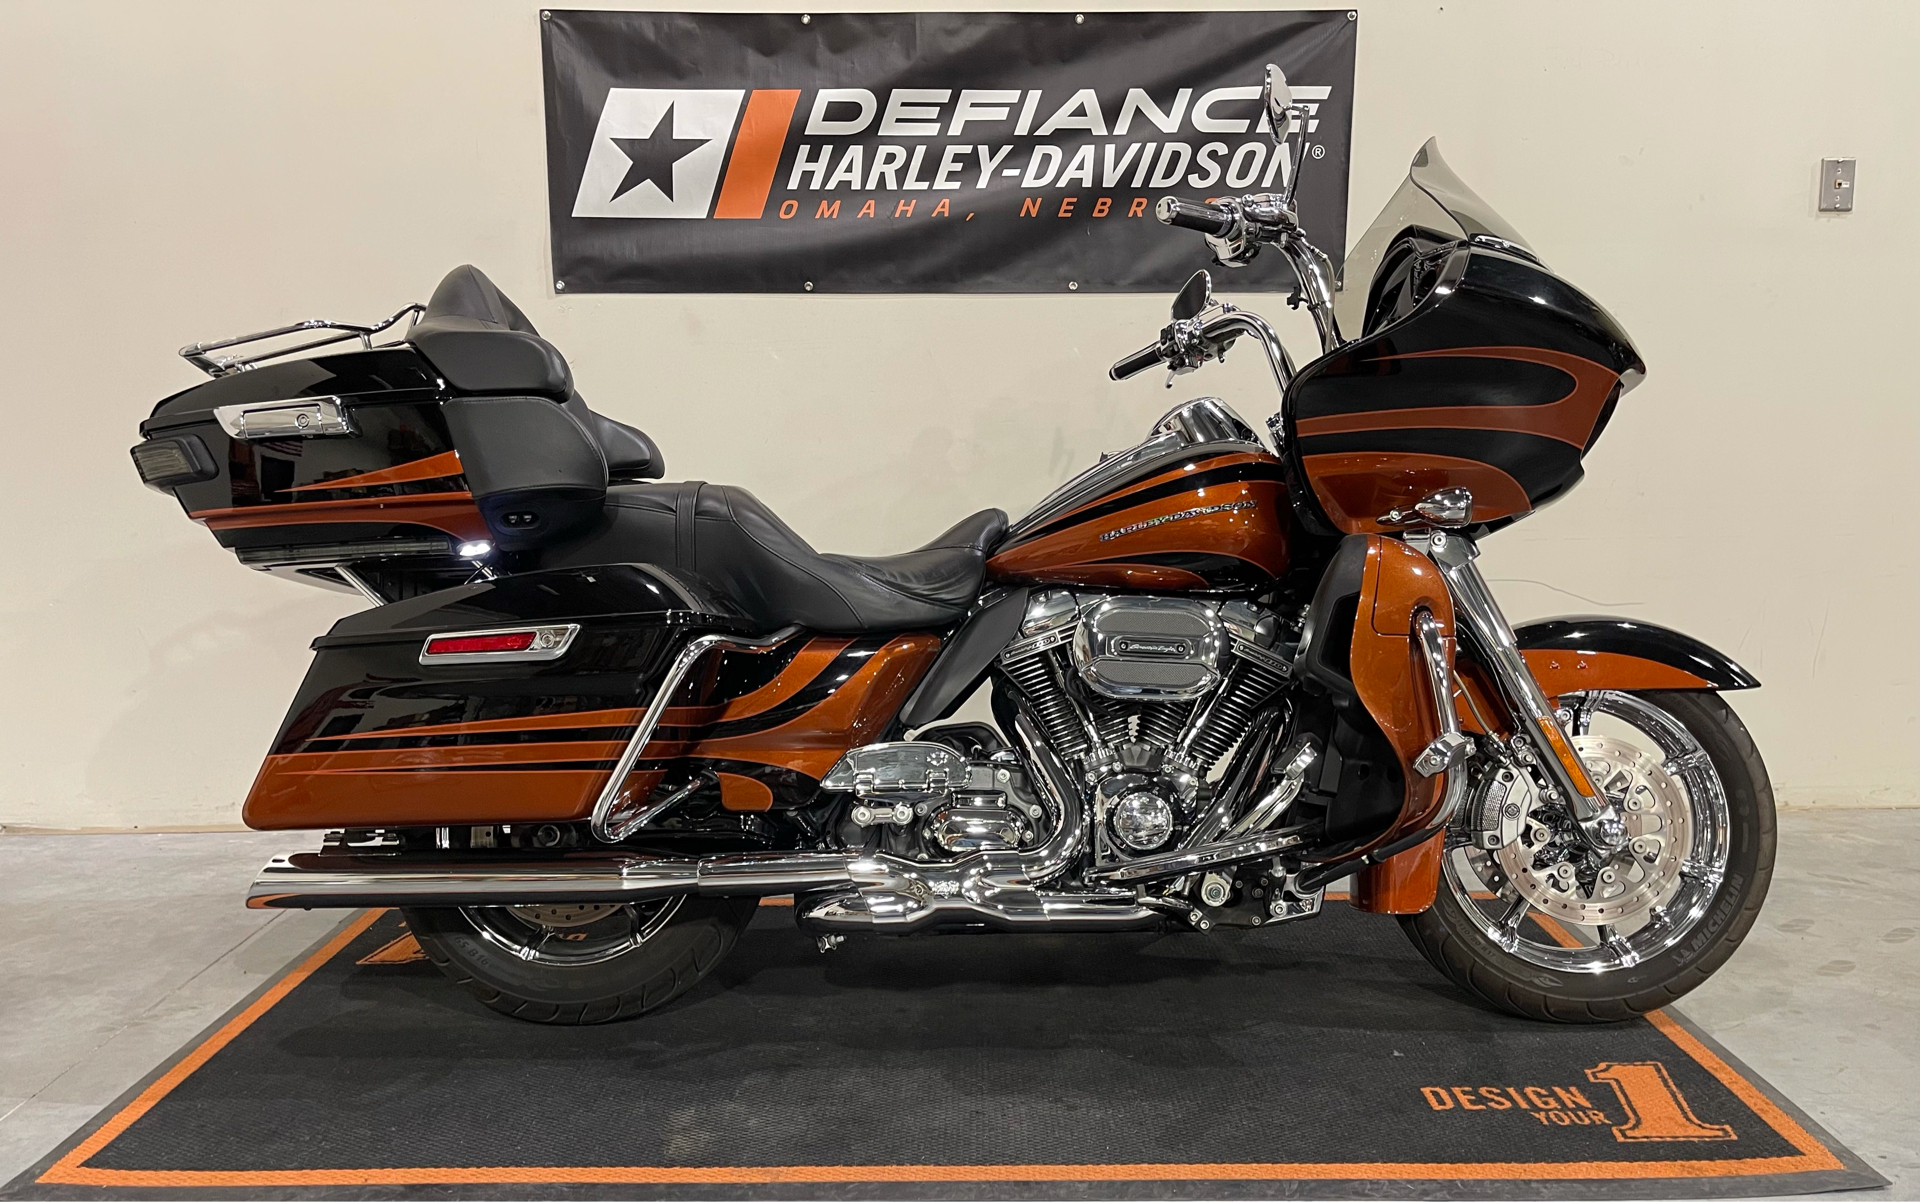 Used 2015 Harley Davidson Cvo Road Glide Ultra Carbon Dust Autumn Sunset Motorcycles In Omaha Ne U 11391